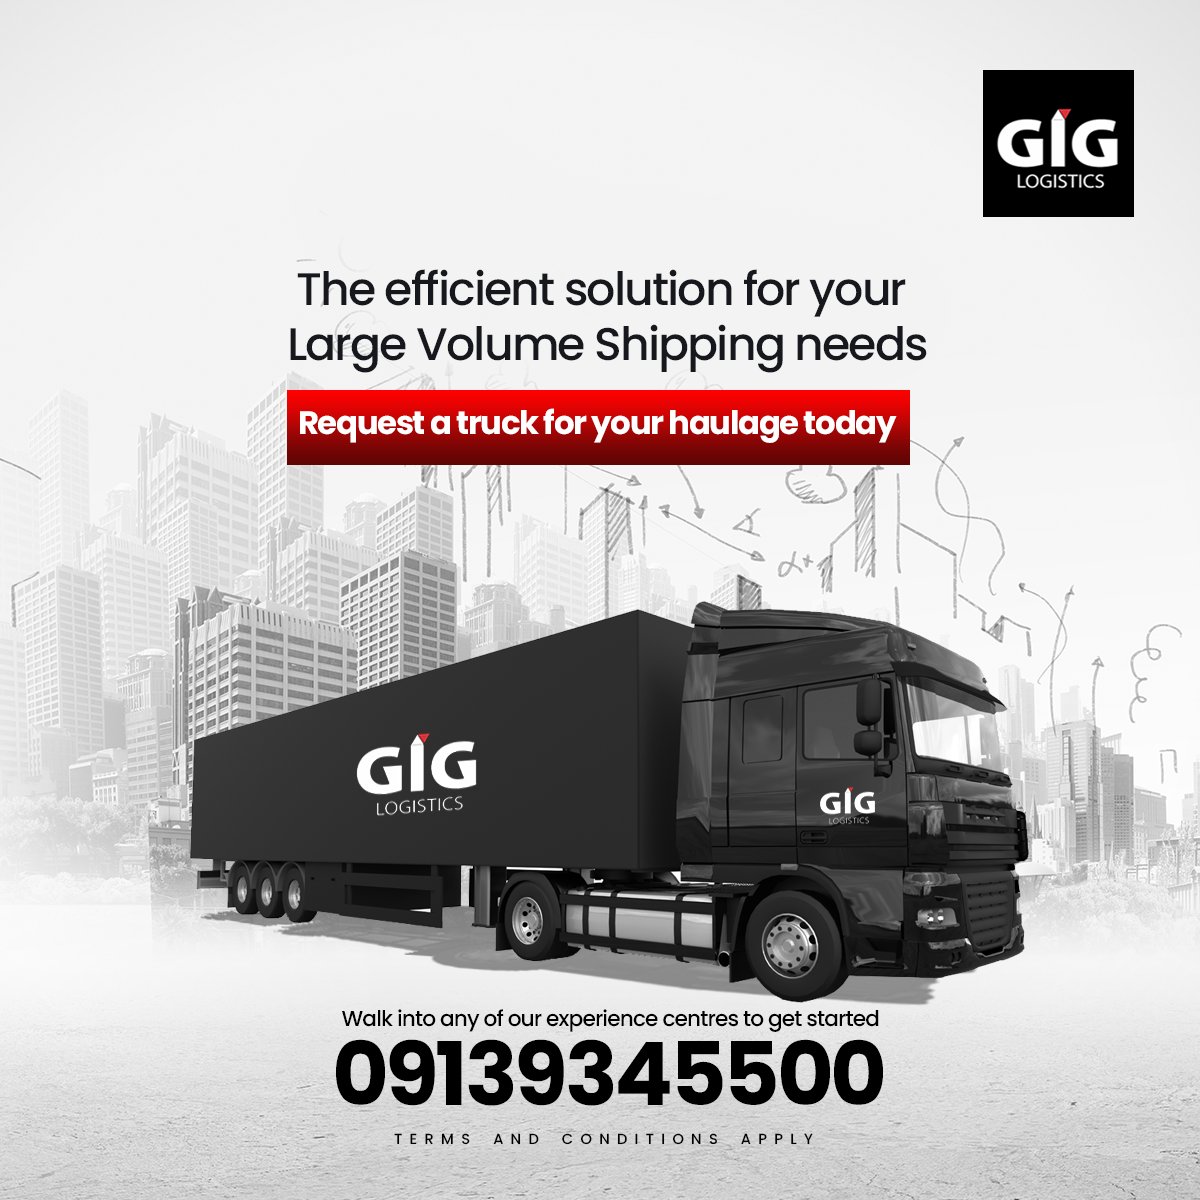 You've got large shipments? We've got trucks!

Visit any of our experience centres closest to you or call 09139345500 to request a truck for your haulage today.

#giglogistics 
#WeDeliver